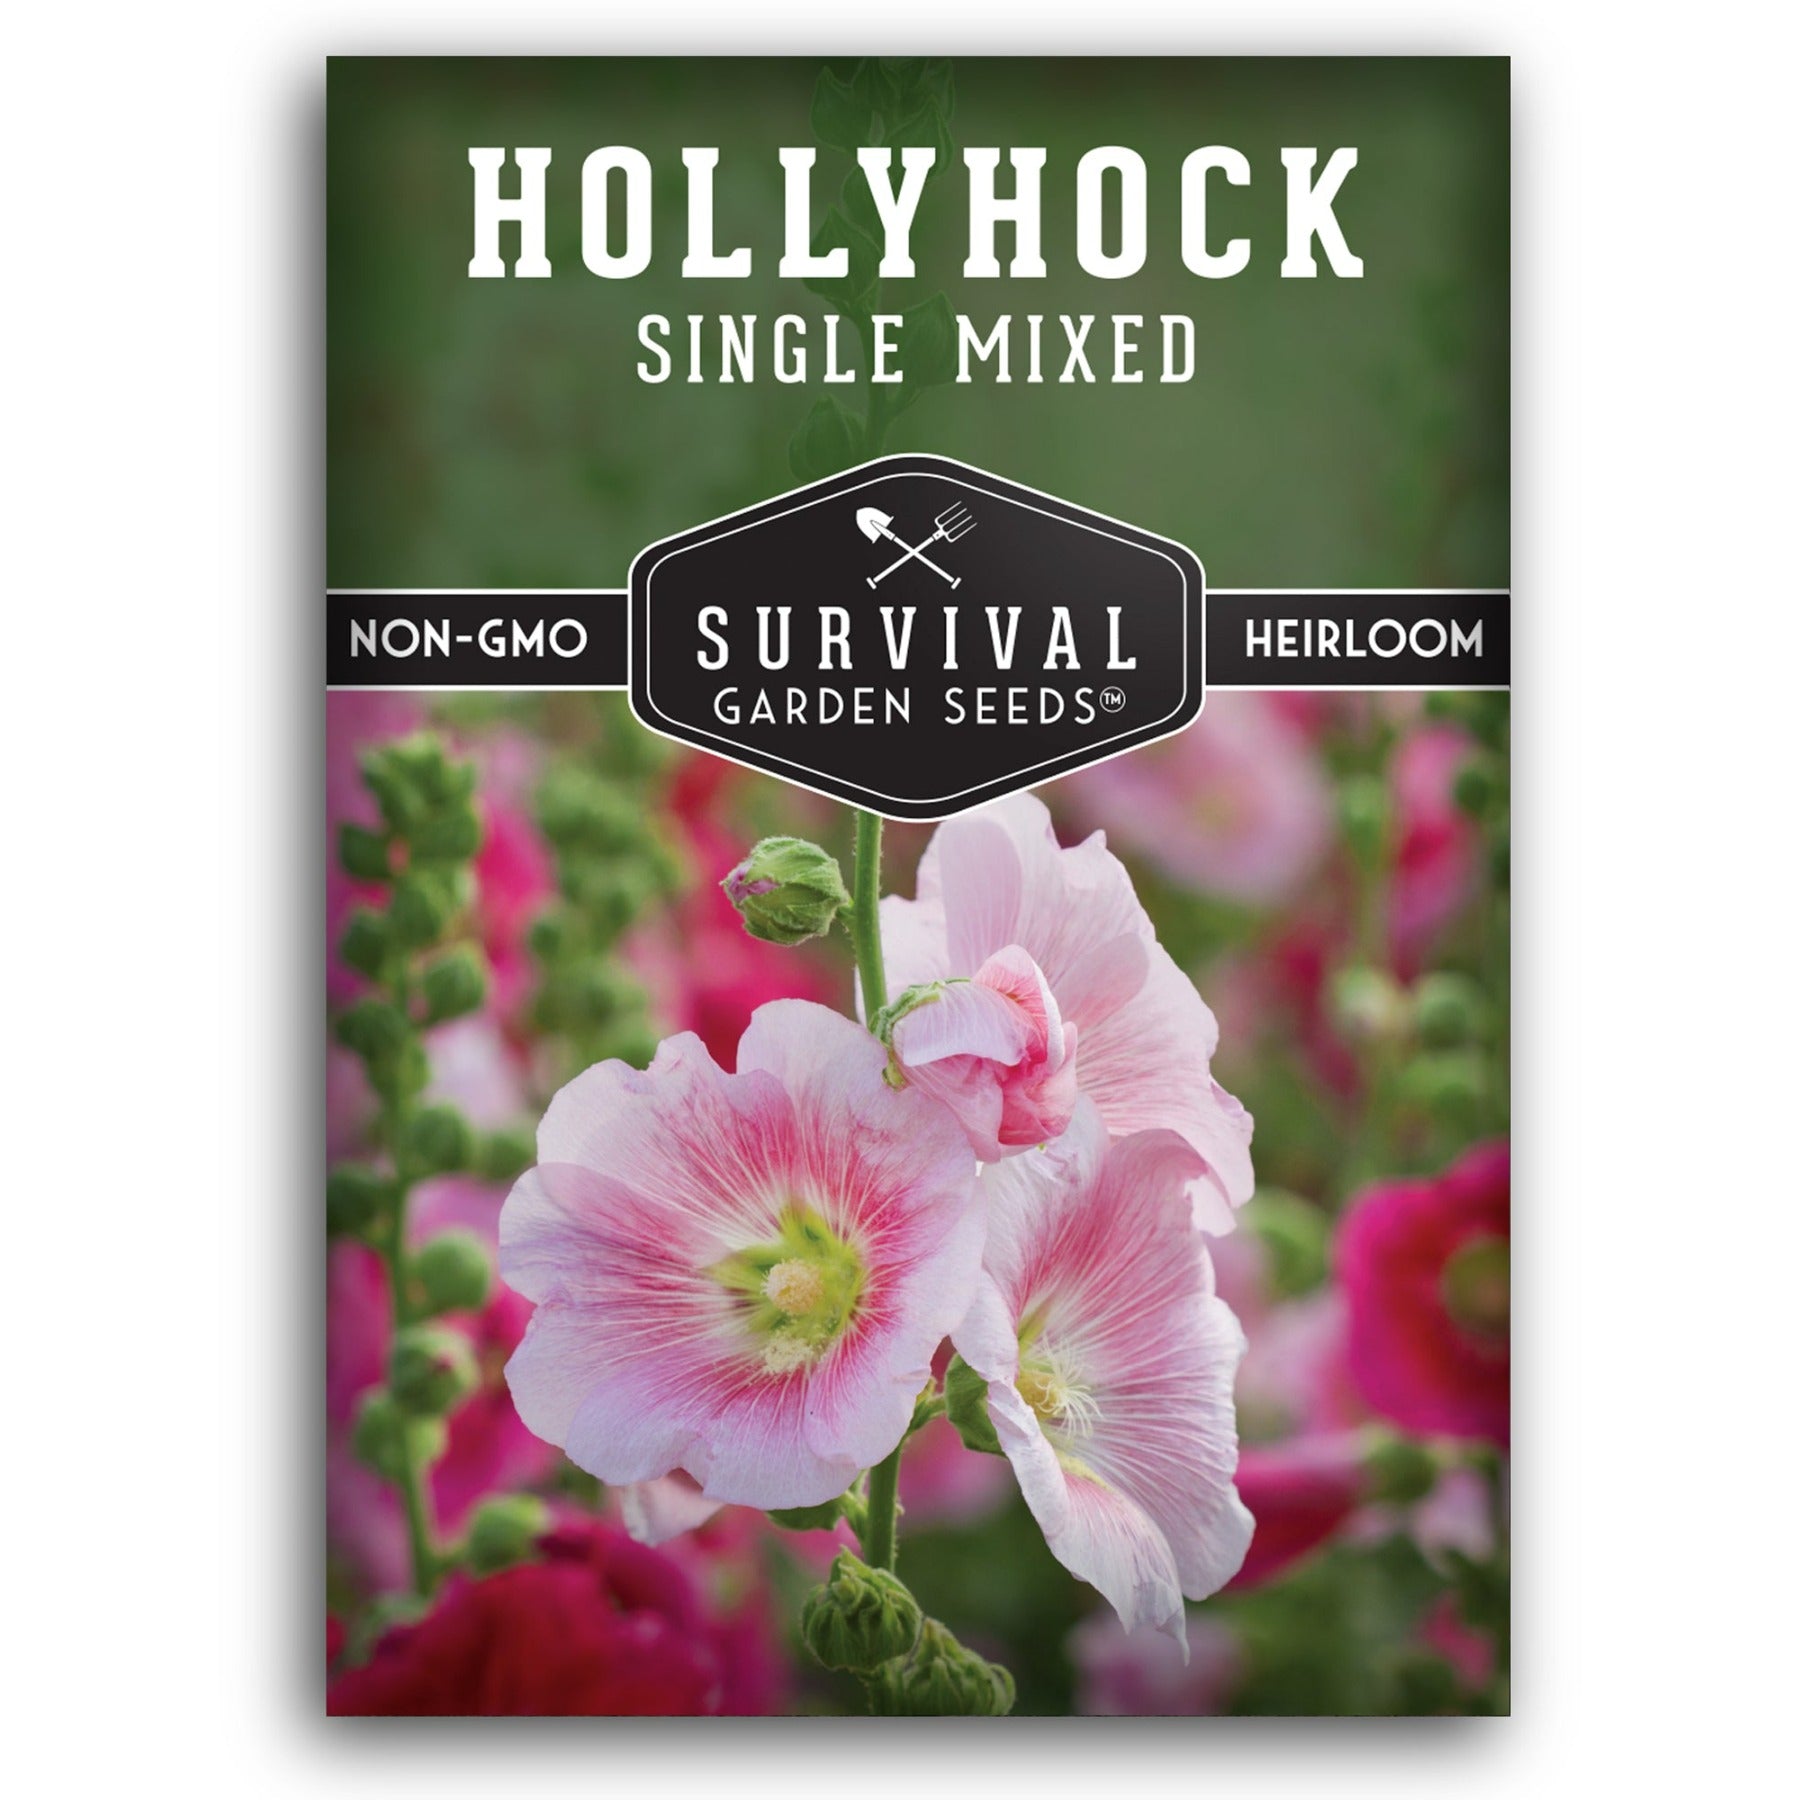 Single Mixed Hollyhock seeds for planting